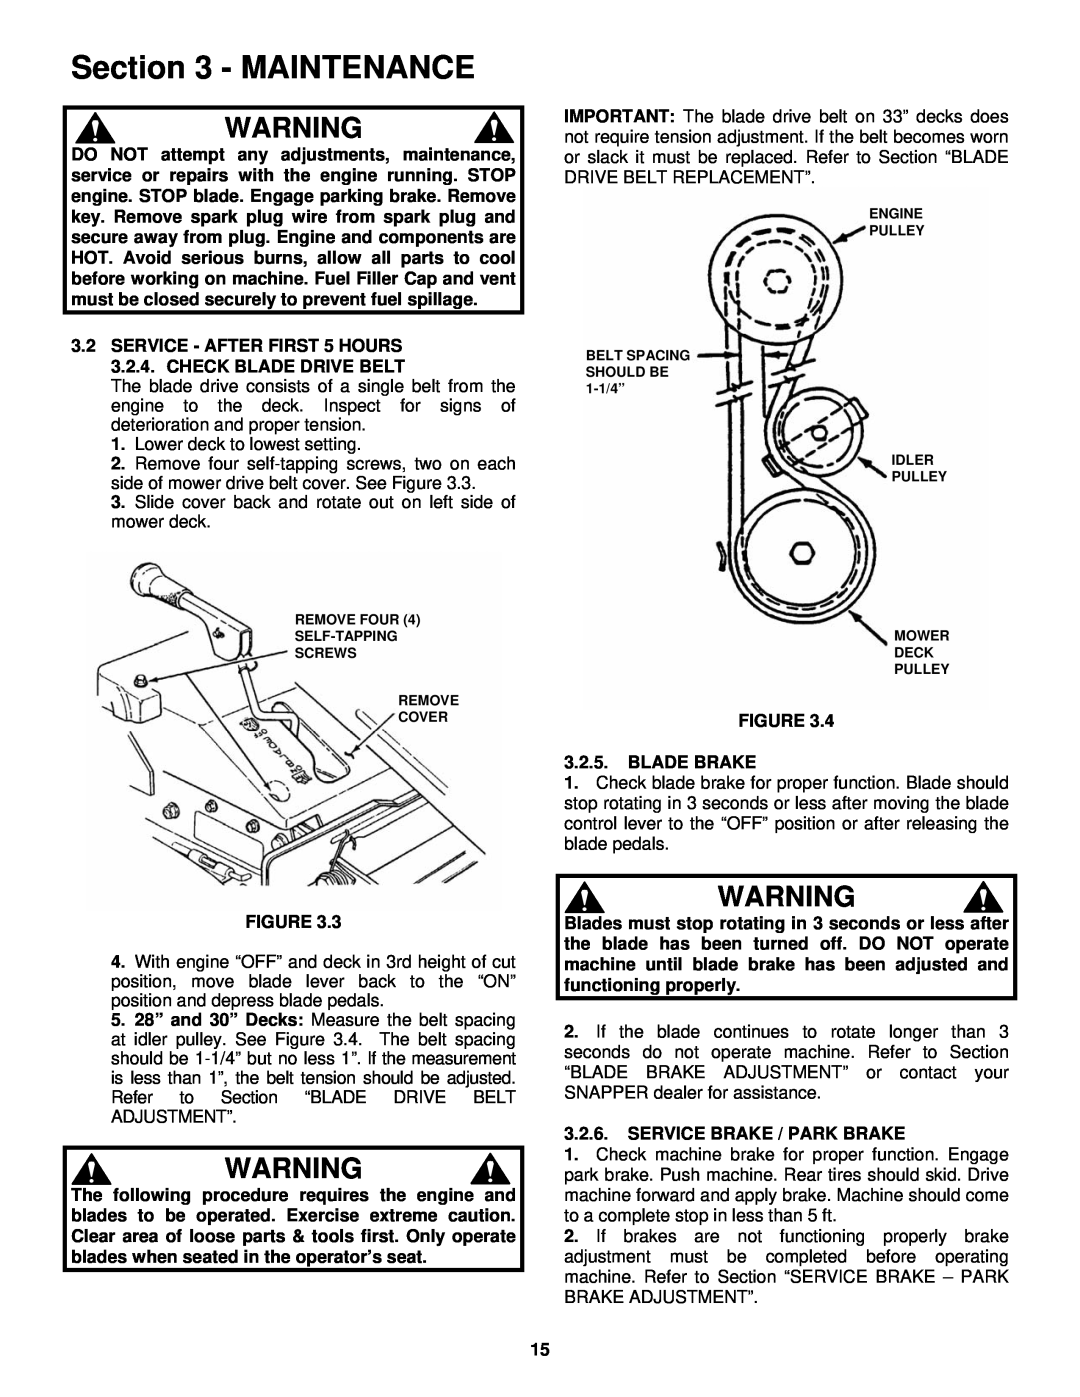 Snapper important safety instructions Maintenance, SERVICE - AFTER FIRST 5 HOURS 3.2.4. CHECK BLADE DRIVE BELT 